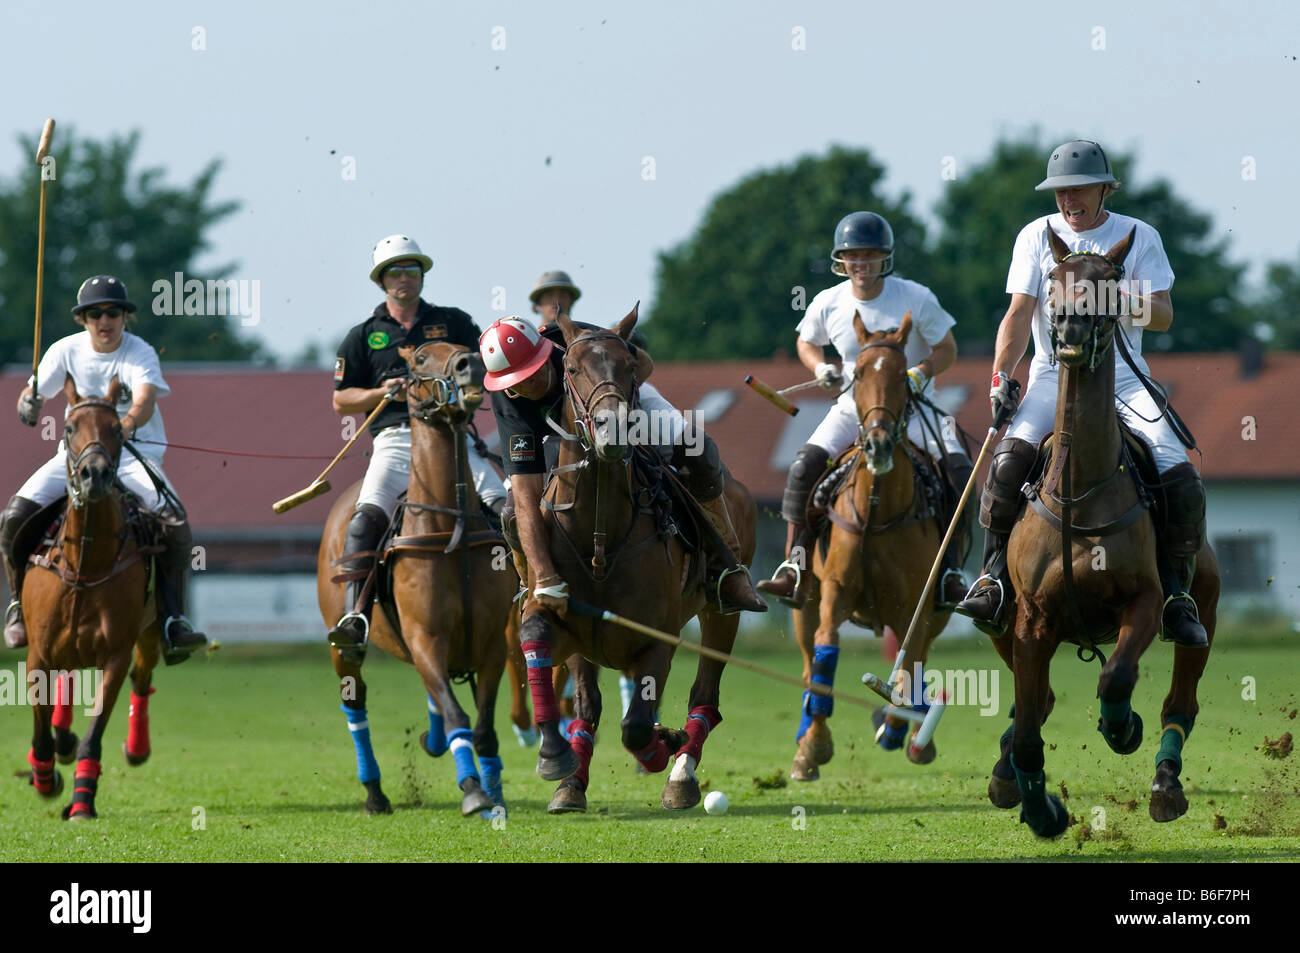 Polo players jostling for the ball during the Berenberg High Goal Trophy 2008 polo tournament in Thann, Holzkirchen, Bavaria, G Stock Photo